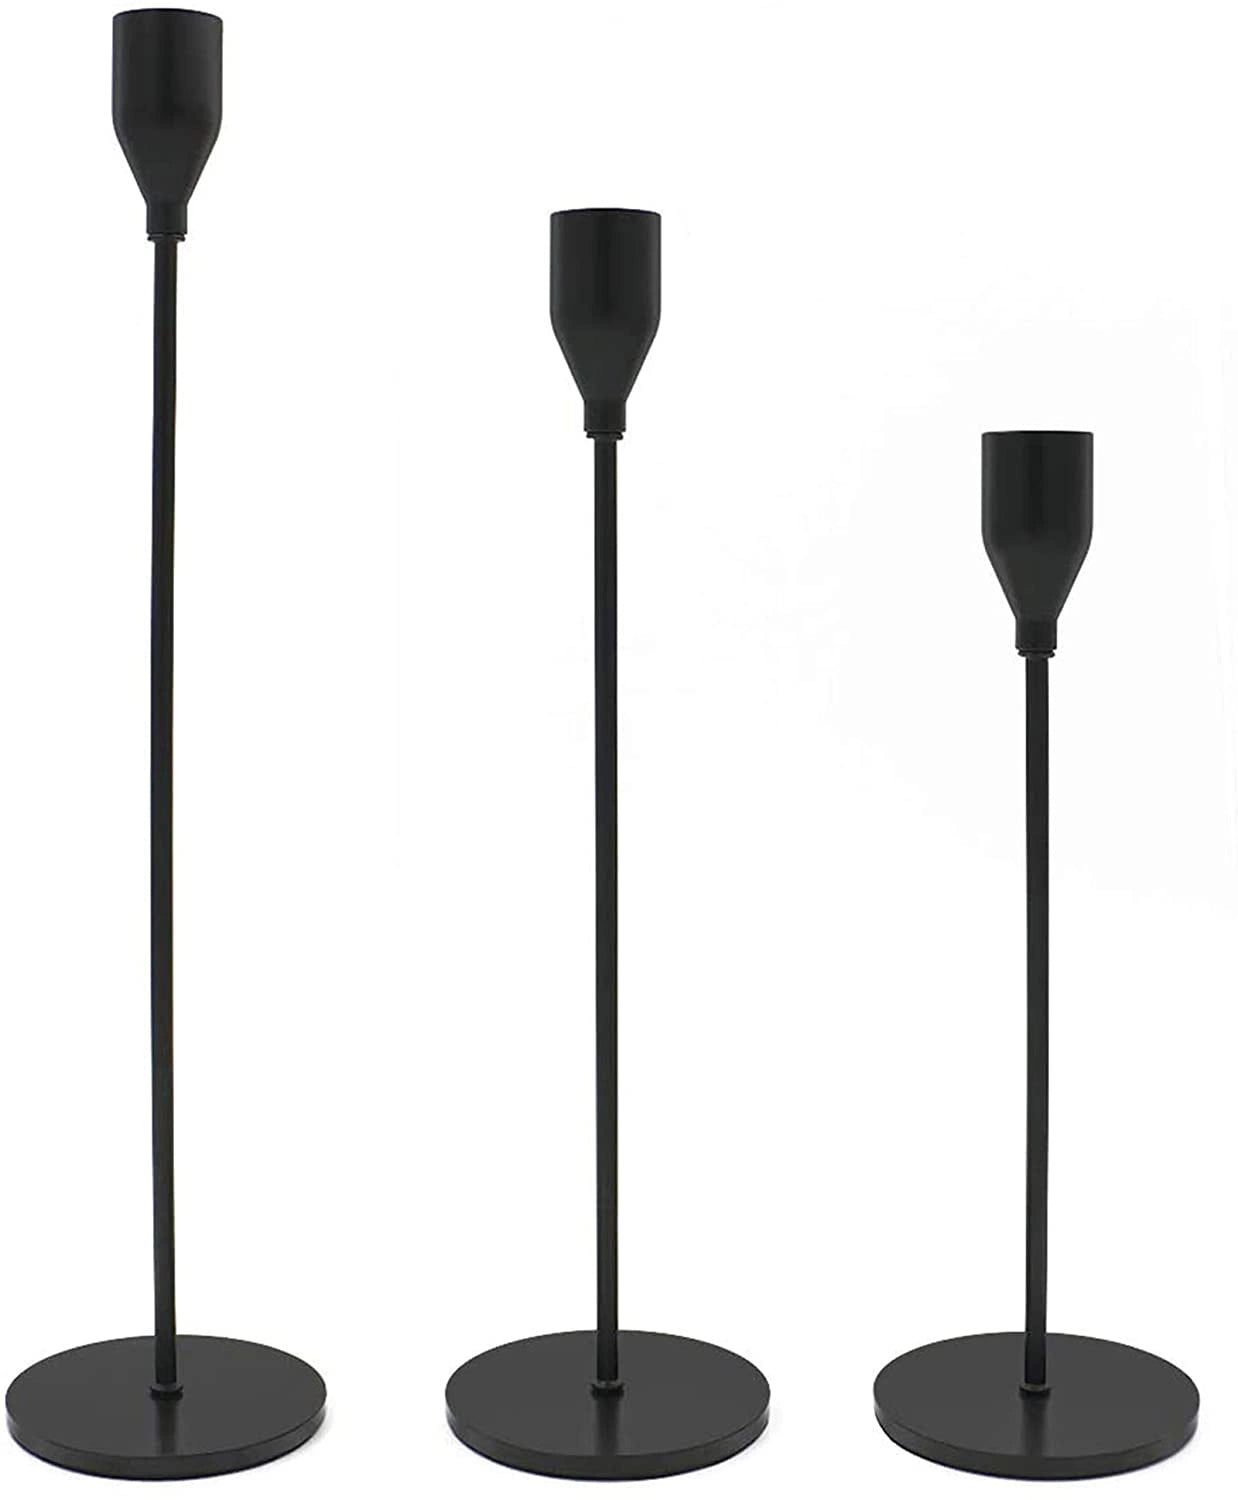 three candle holders black color